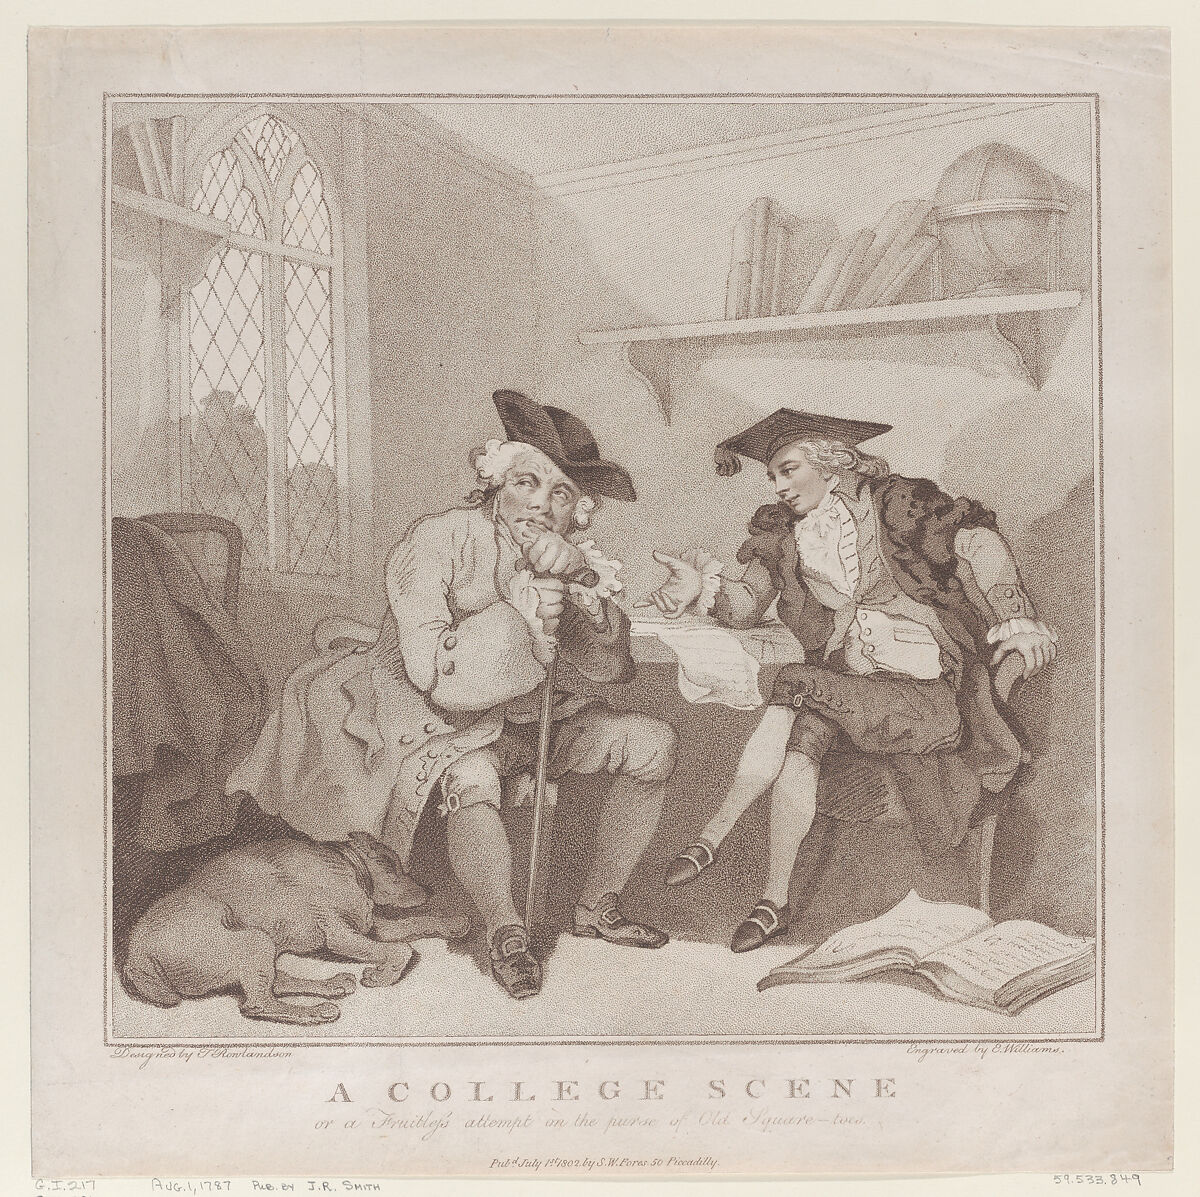 A College Scene, or a Fruitless Attempt on the Purse of Old Square-toes, Edward Williams the Elder (British, active London, ca. 1786), Etching with stipple and softground, printed in brown ink 